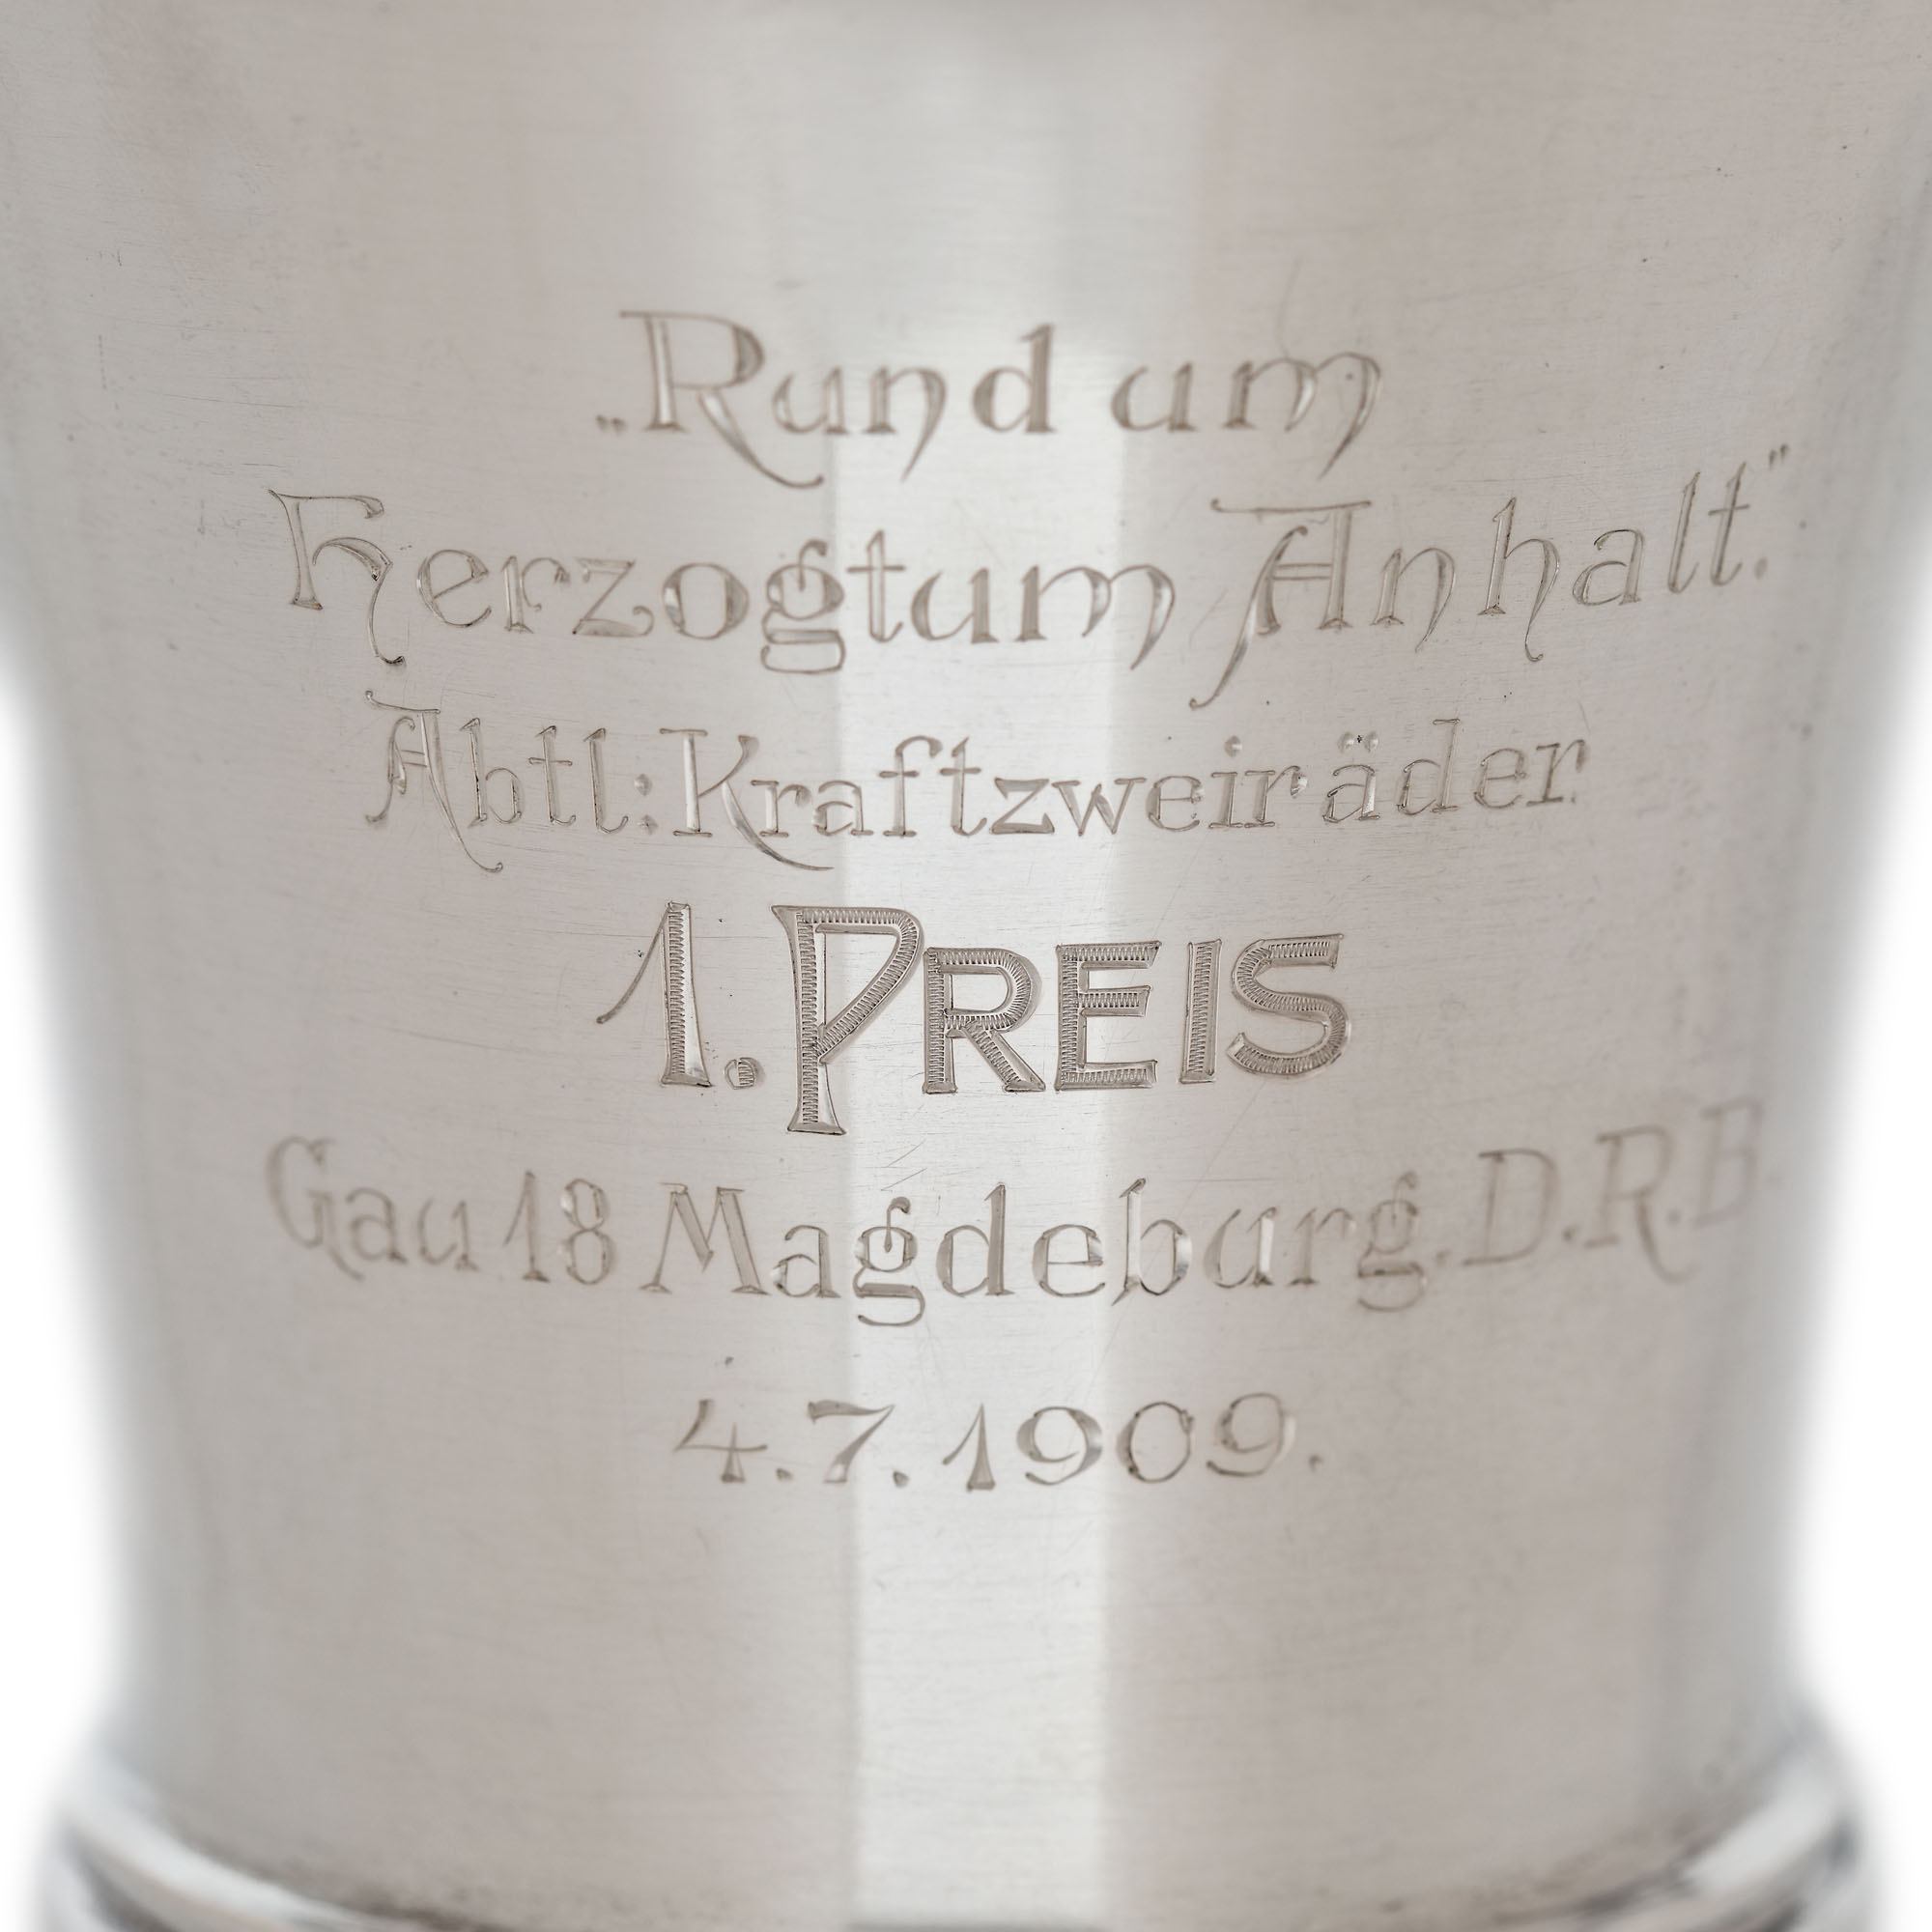 German workshop, Anhalt Duchy cup, silver prize cup, for motorcycle racing, approx. 1909 - Image 2 of 4